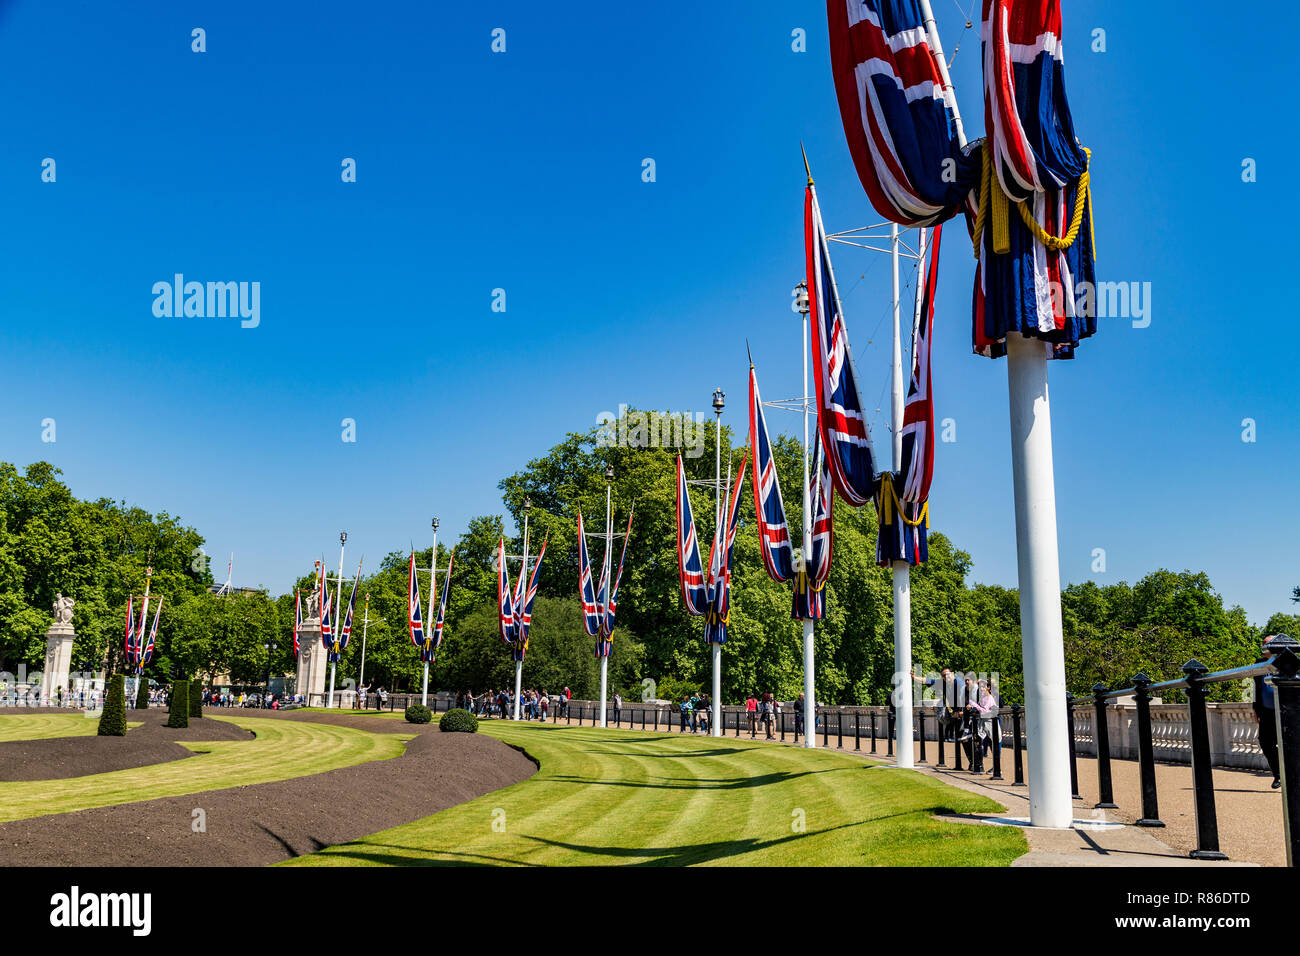 A view of UK flags around Buckingham palace in London, England Stock Photo